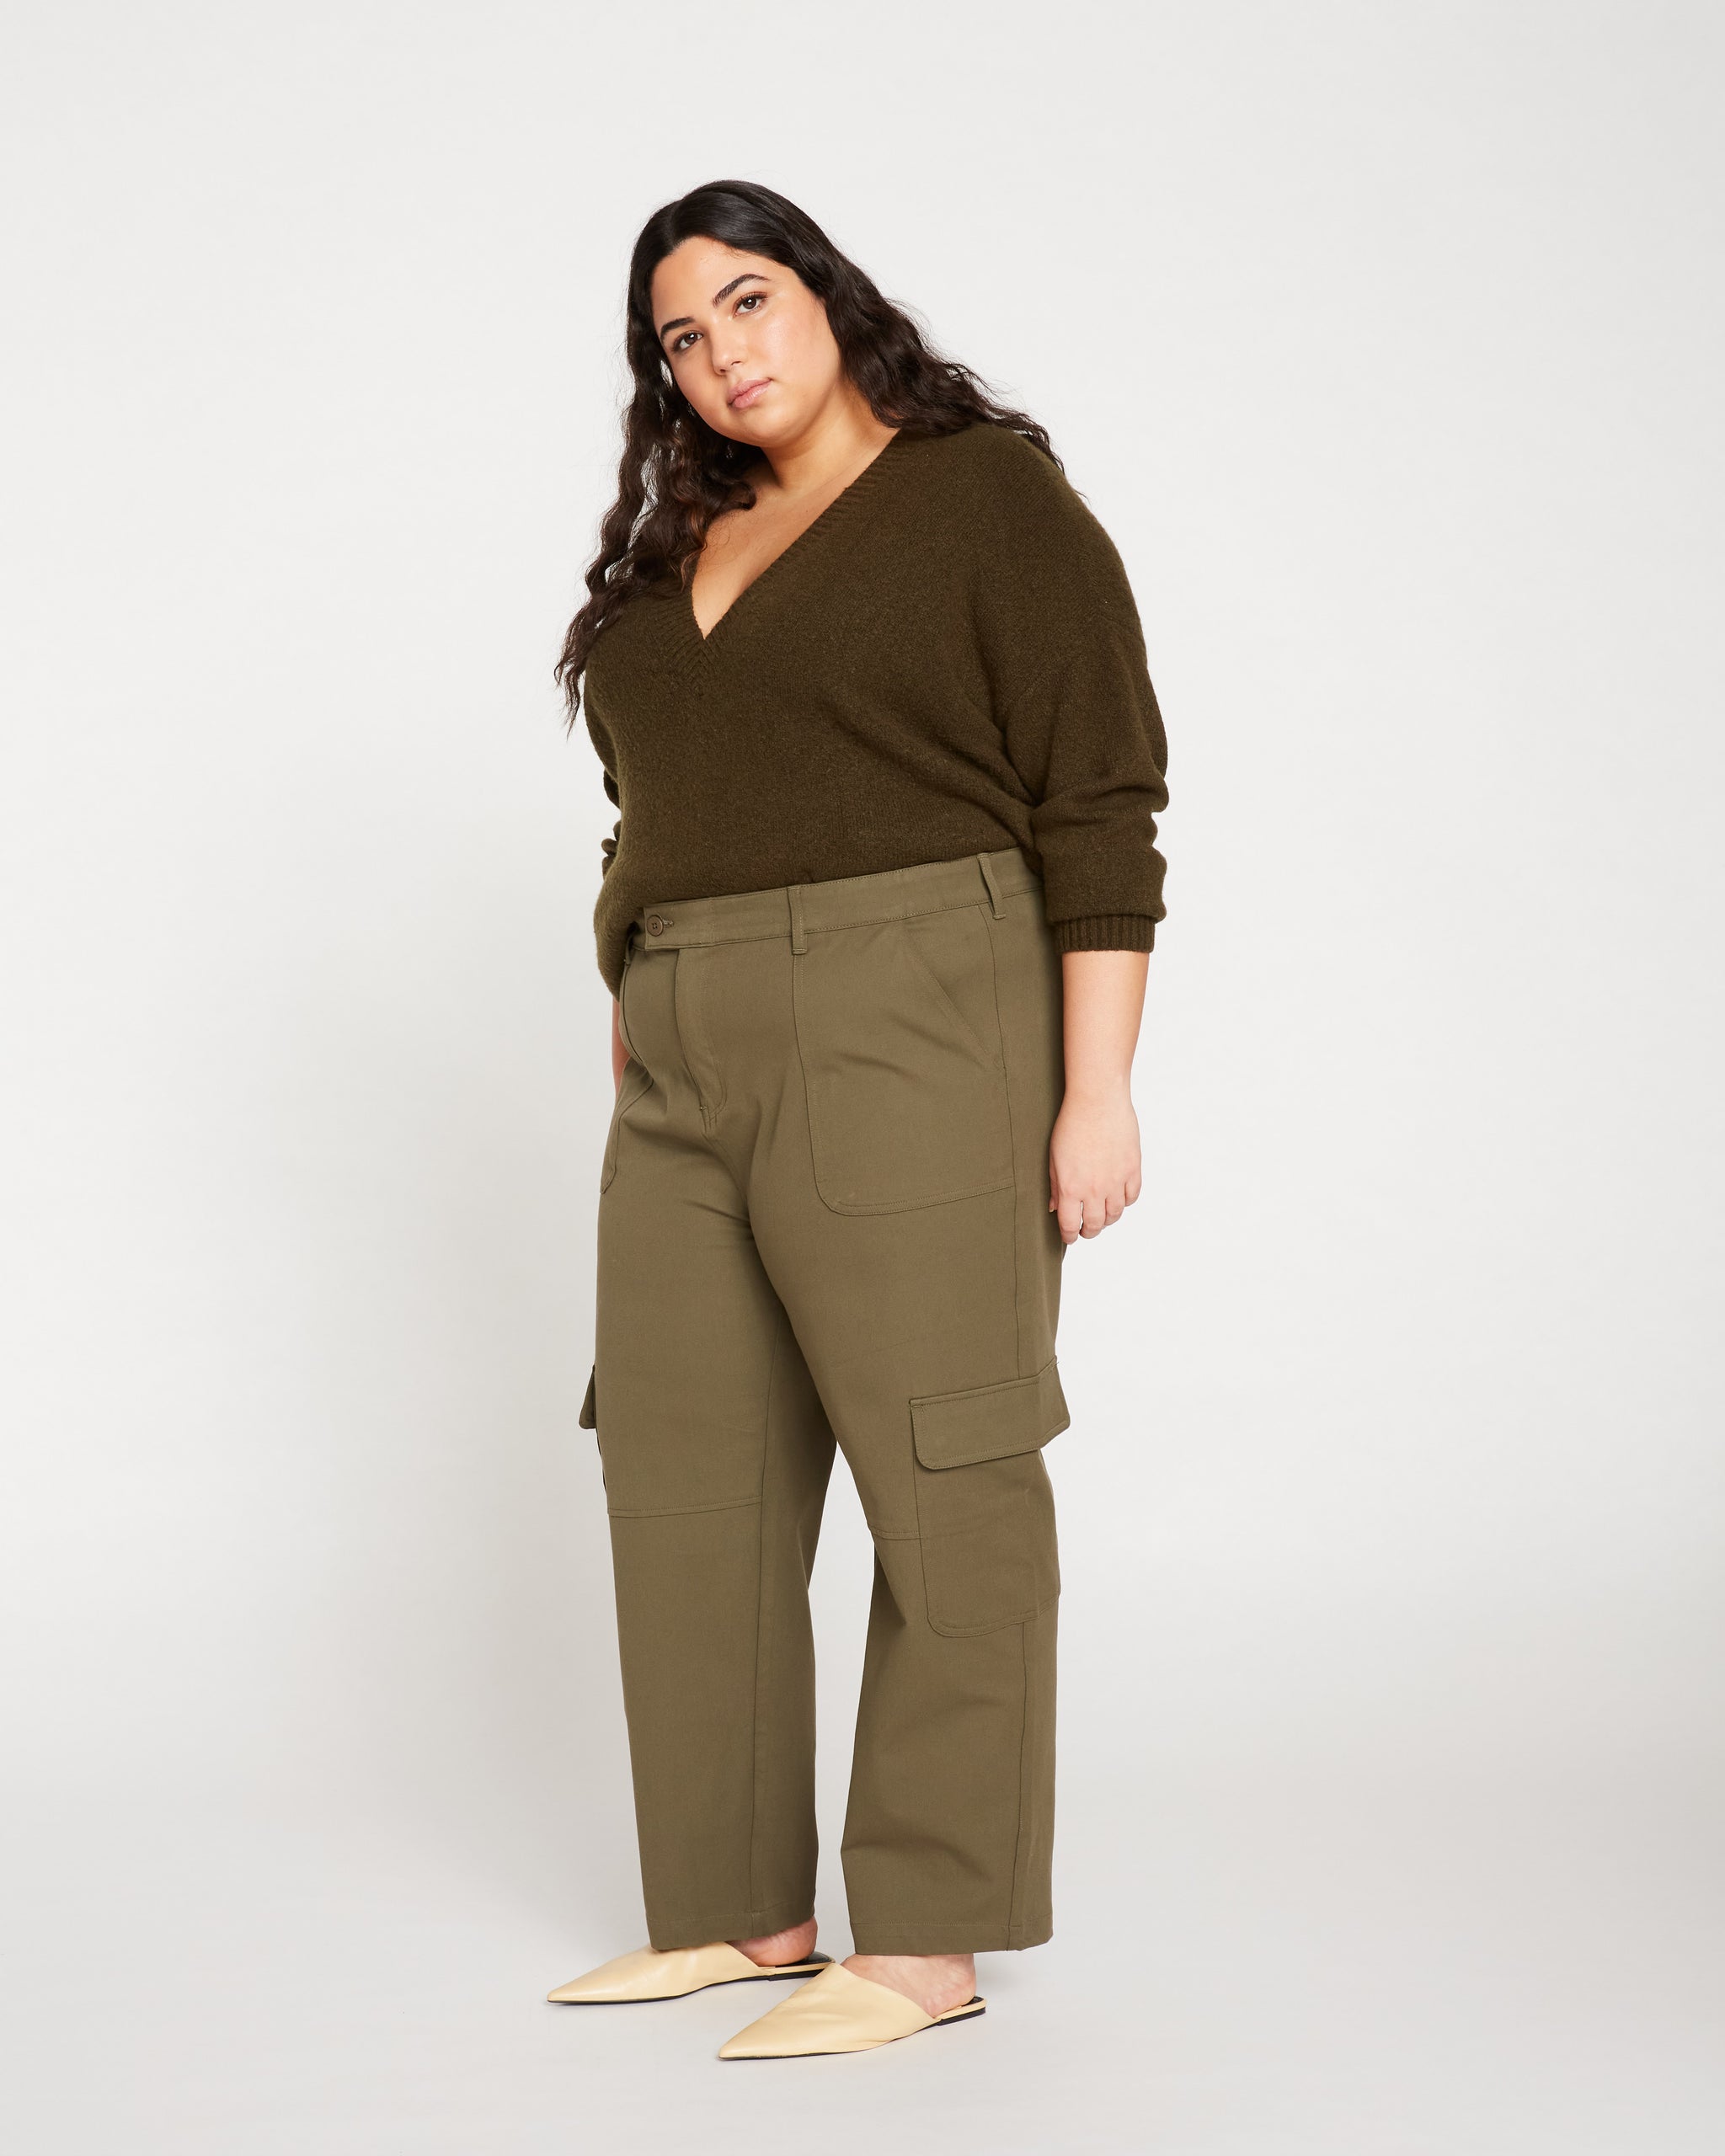 COTTON STRETCHABLE FABRICS Stretch Cargo Pants at Rs 925/piece in